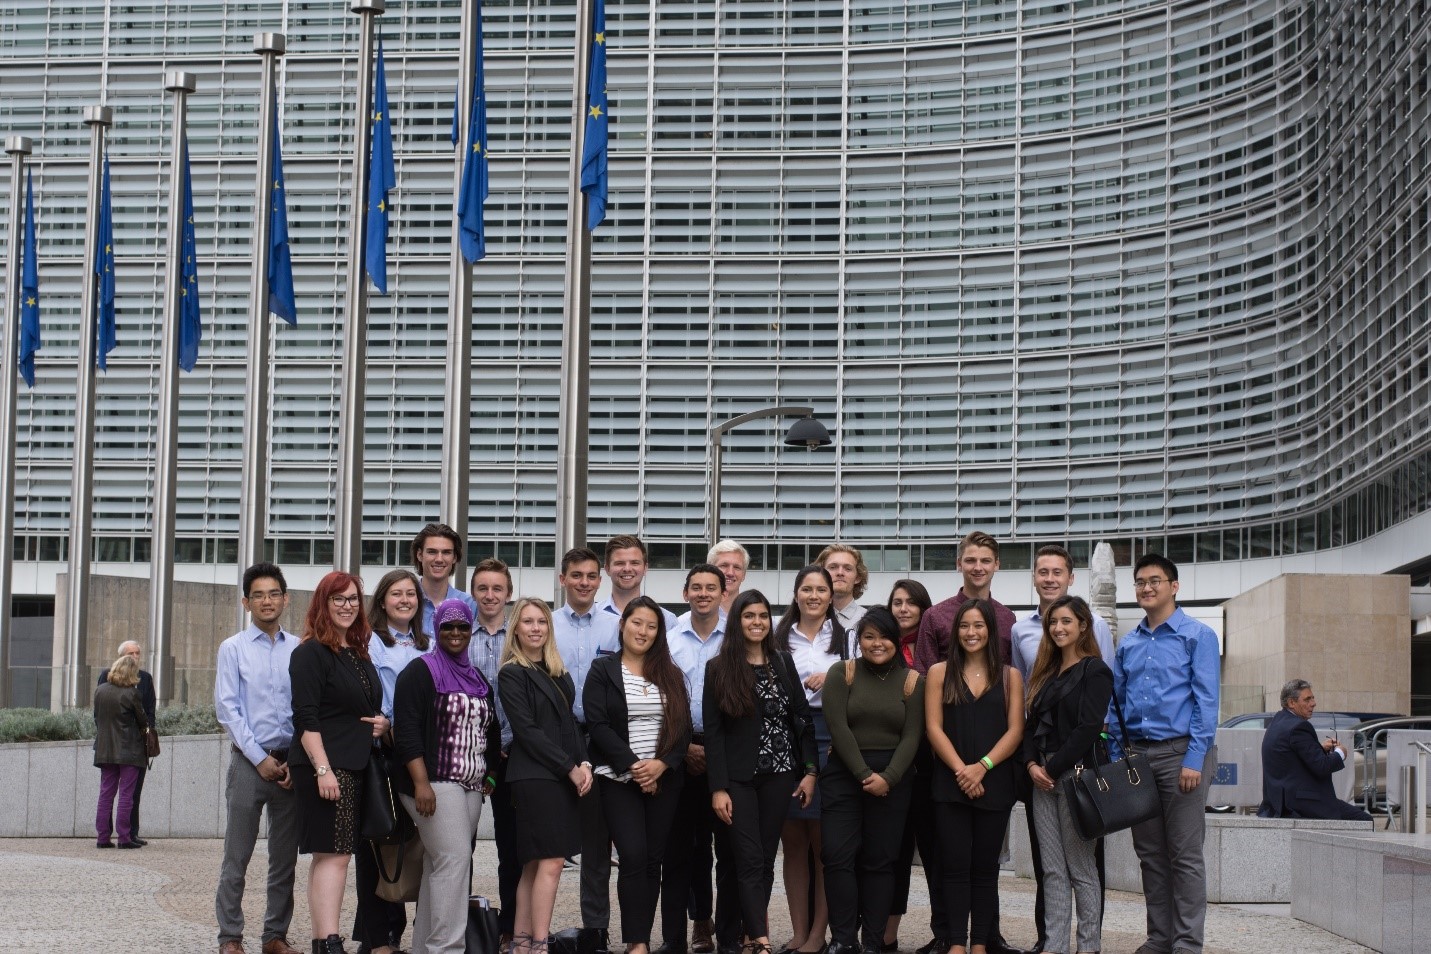 EU study tour group in front of a building